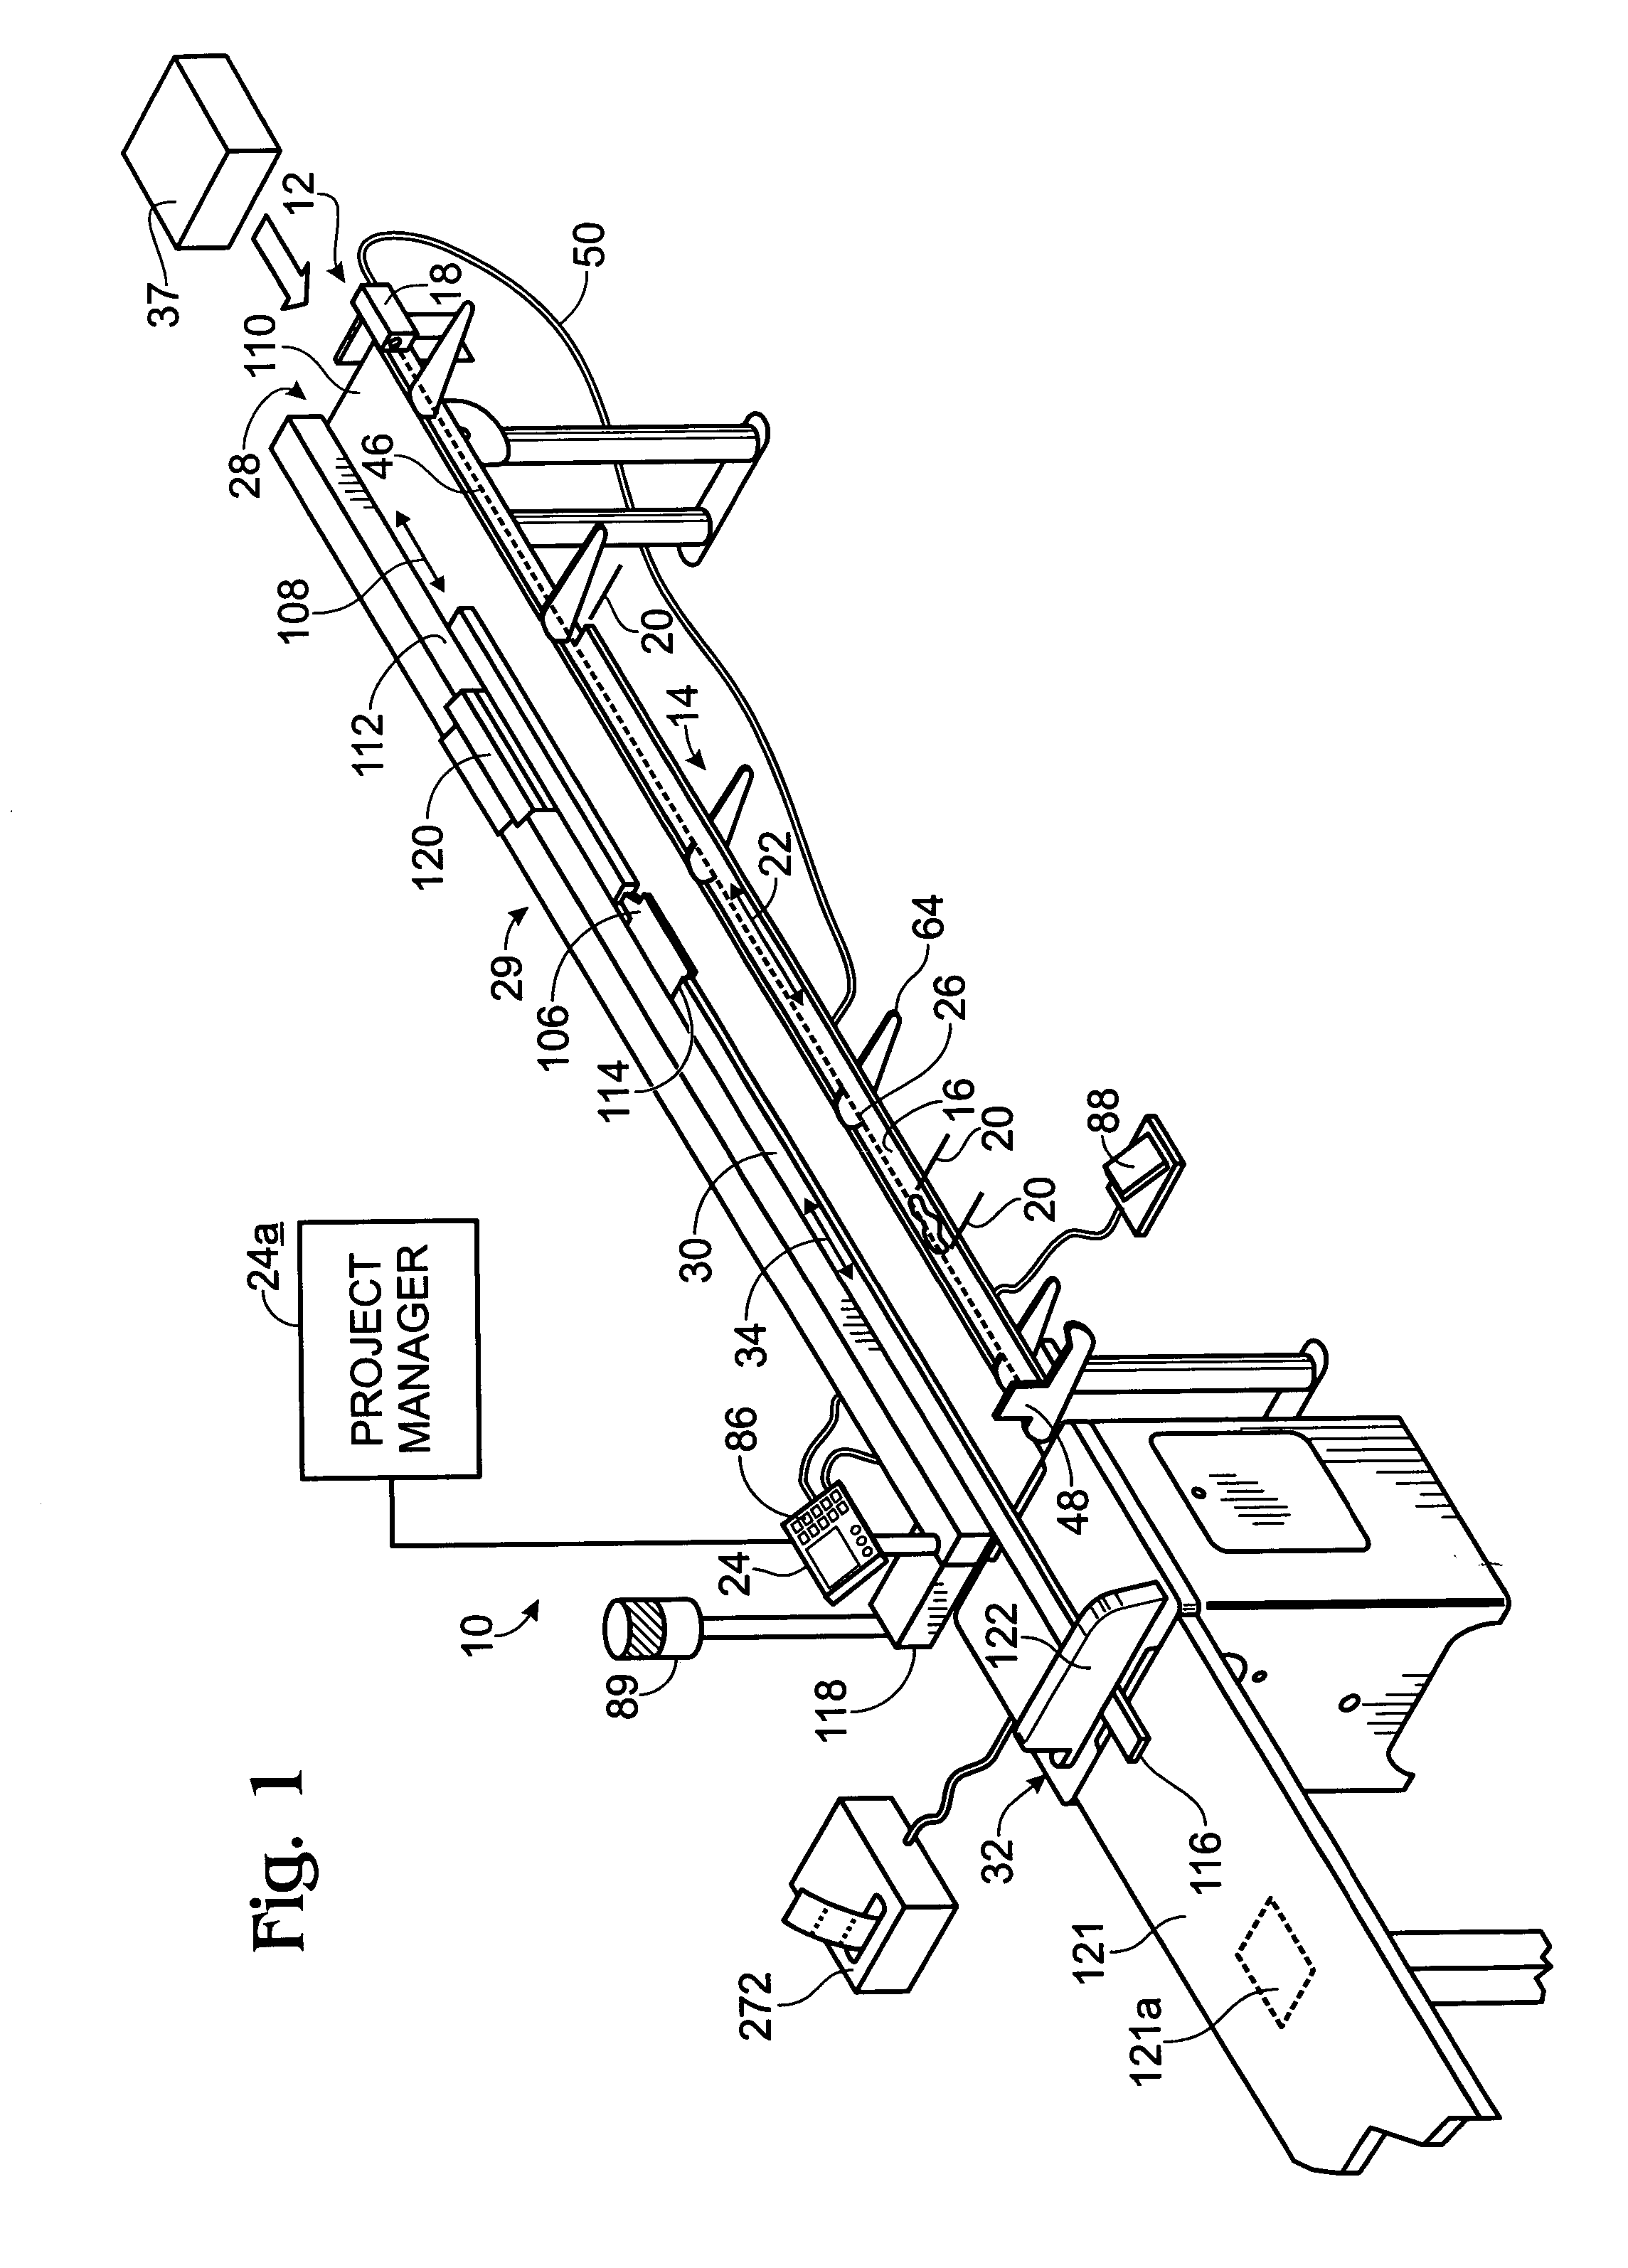 Apparatus and methods for double ended processing